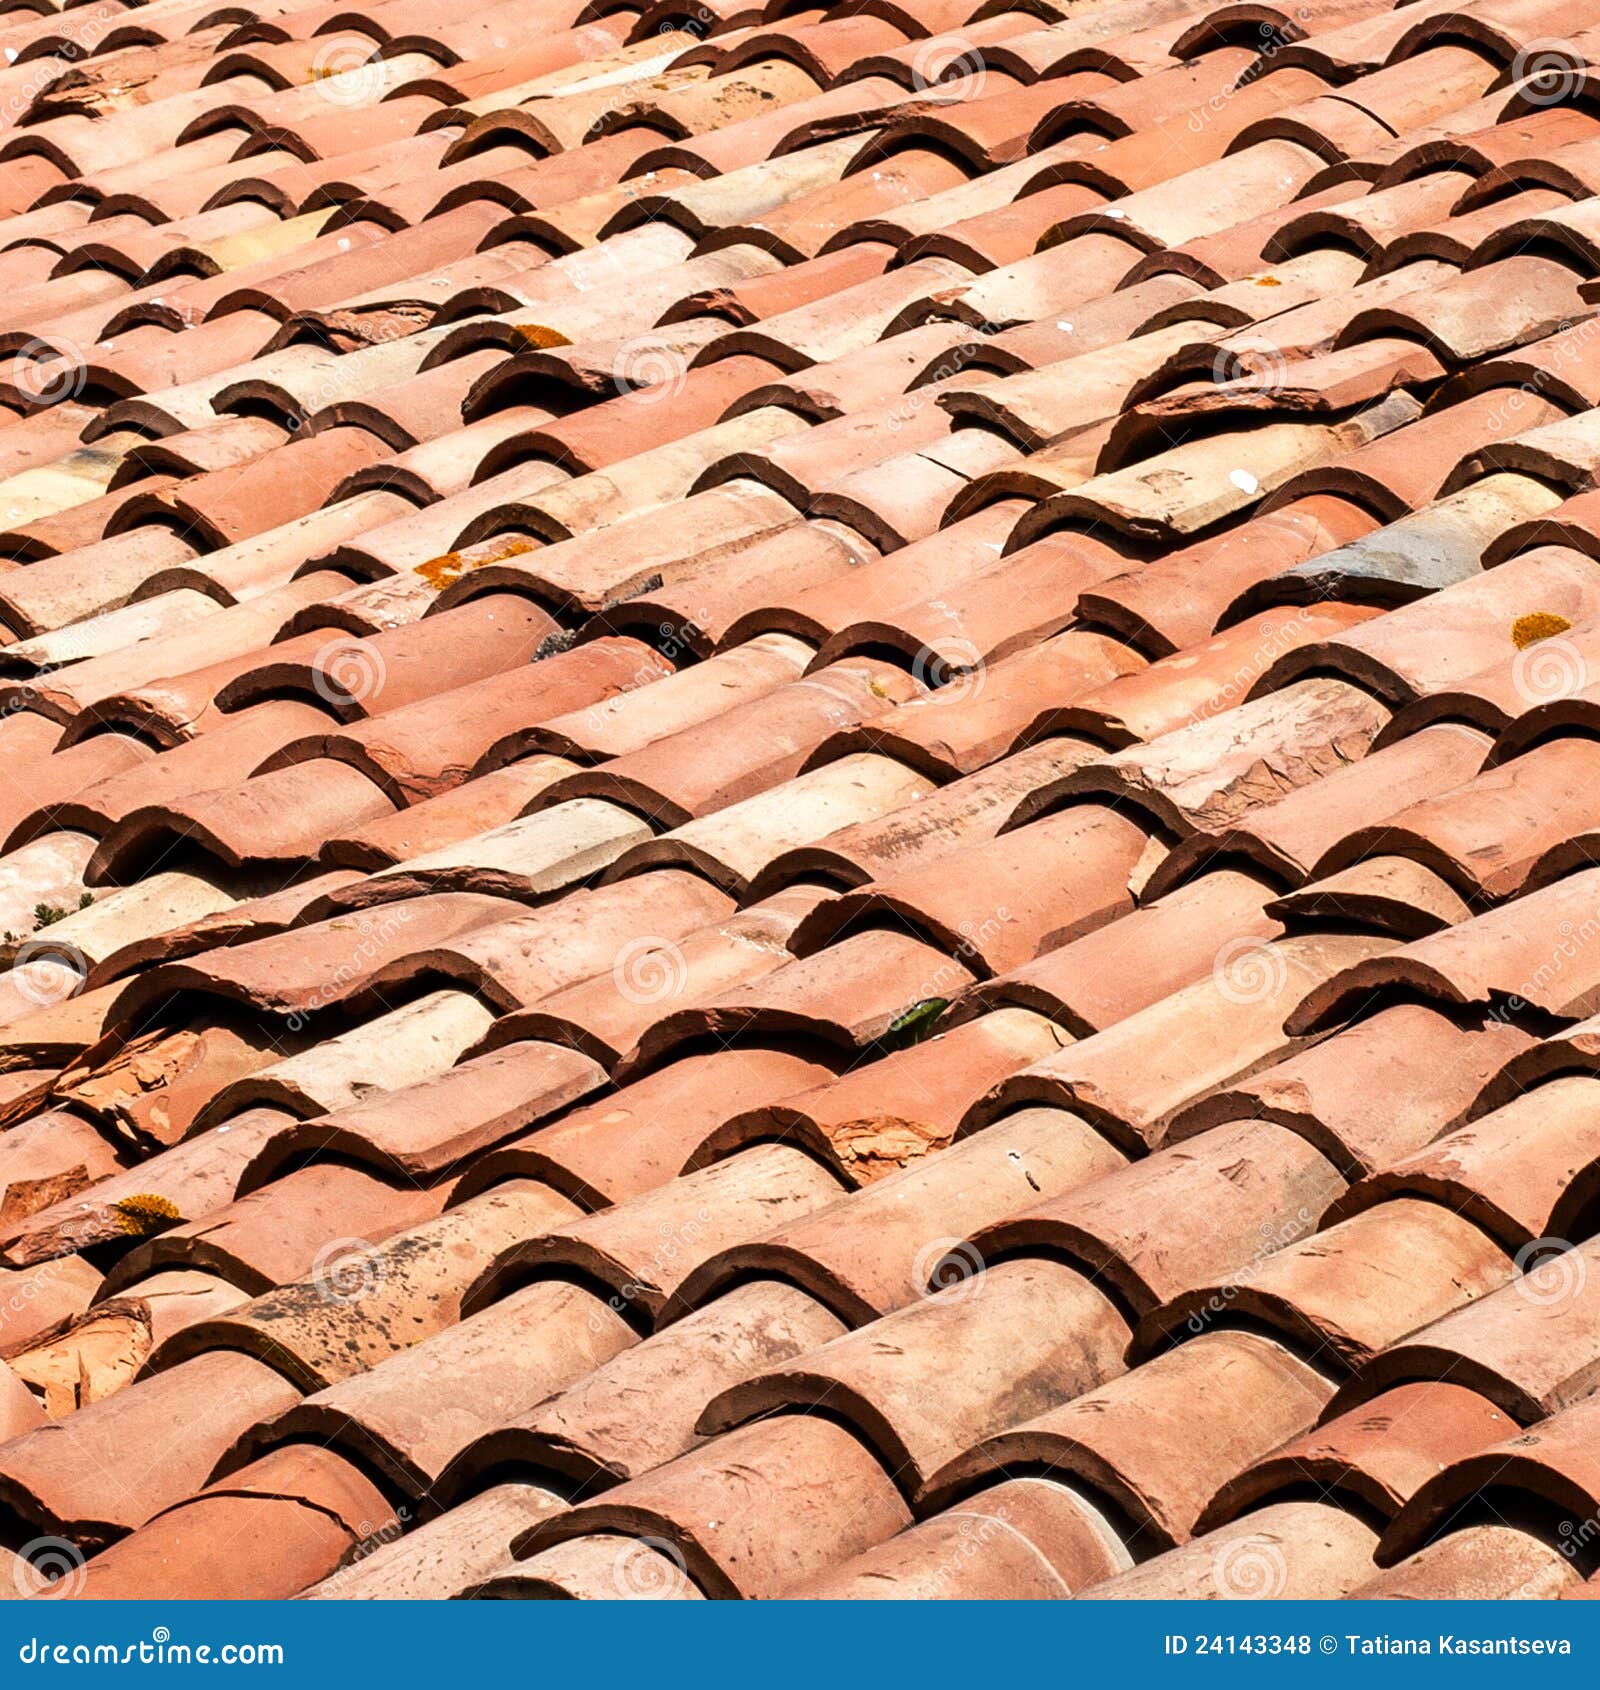 Tiles on old castle roof stock photo. Image of material - 24143348